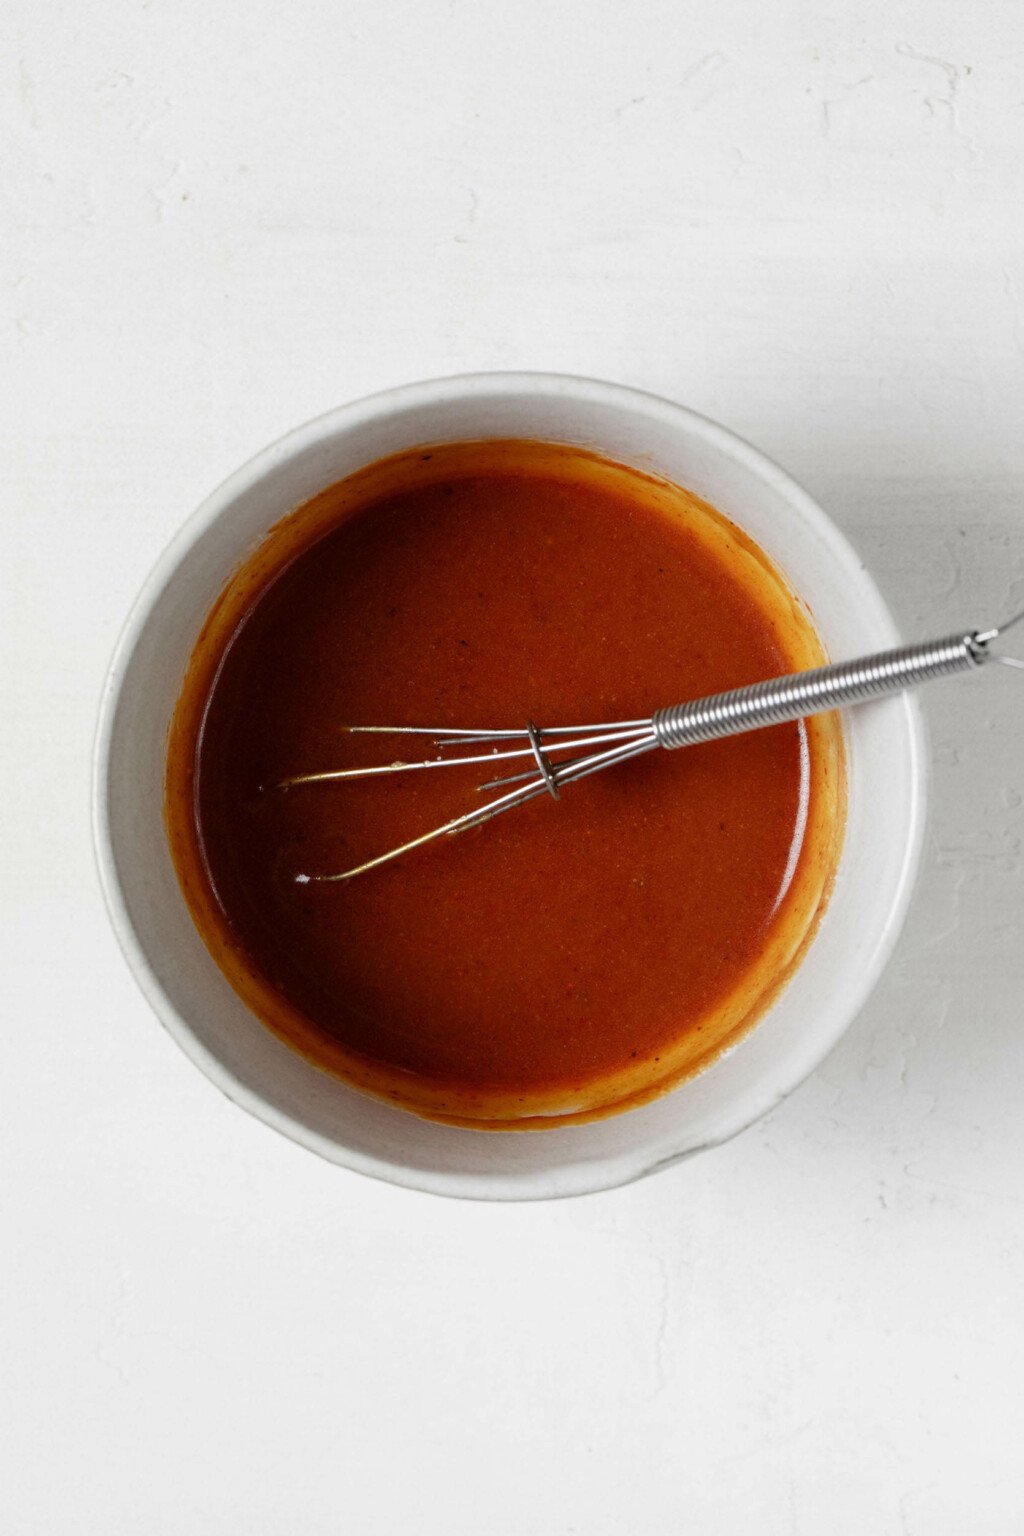 A red colored sauce is being whisked together in a small mixing bowl.